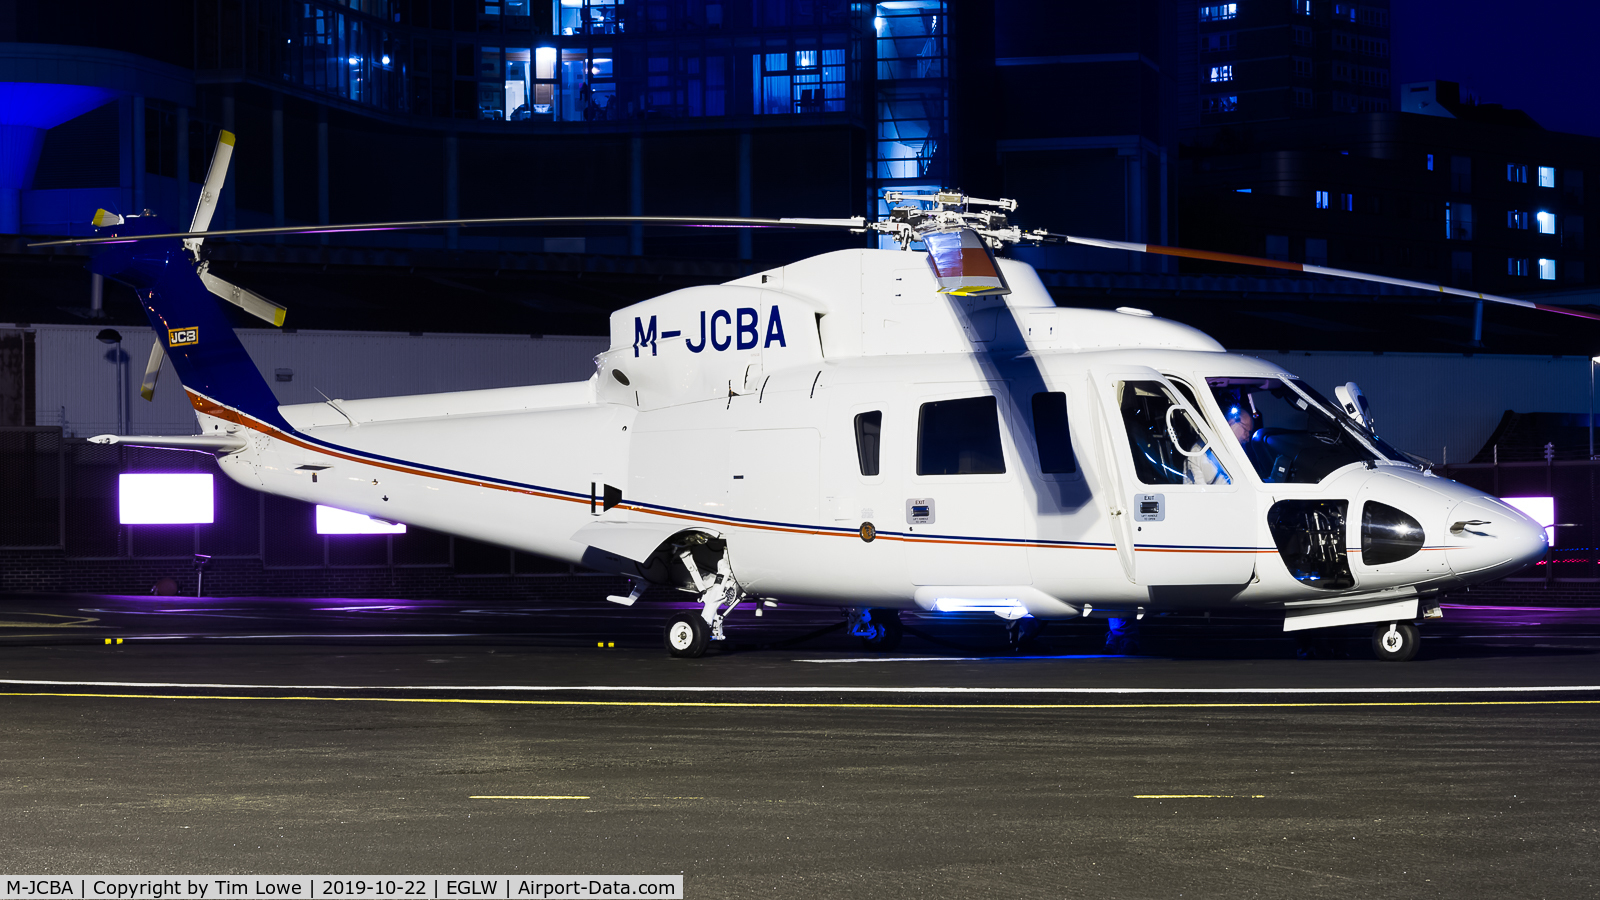 M-JCBA, 2011 Sikorsky S-76C C/N 760807, Parked on the ramp at the London Heliport